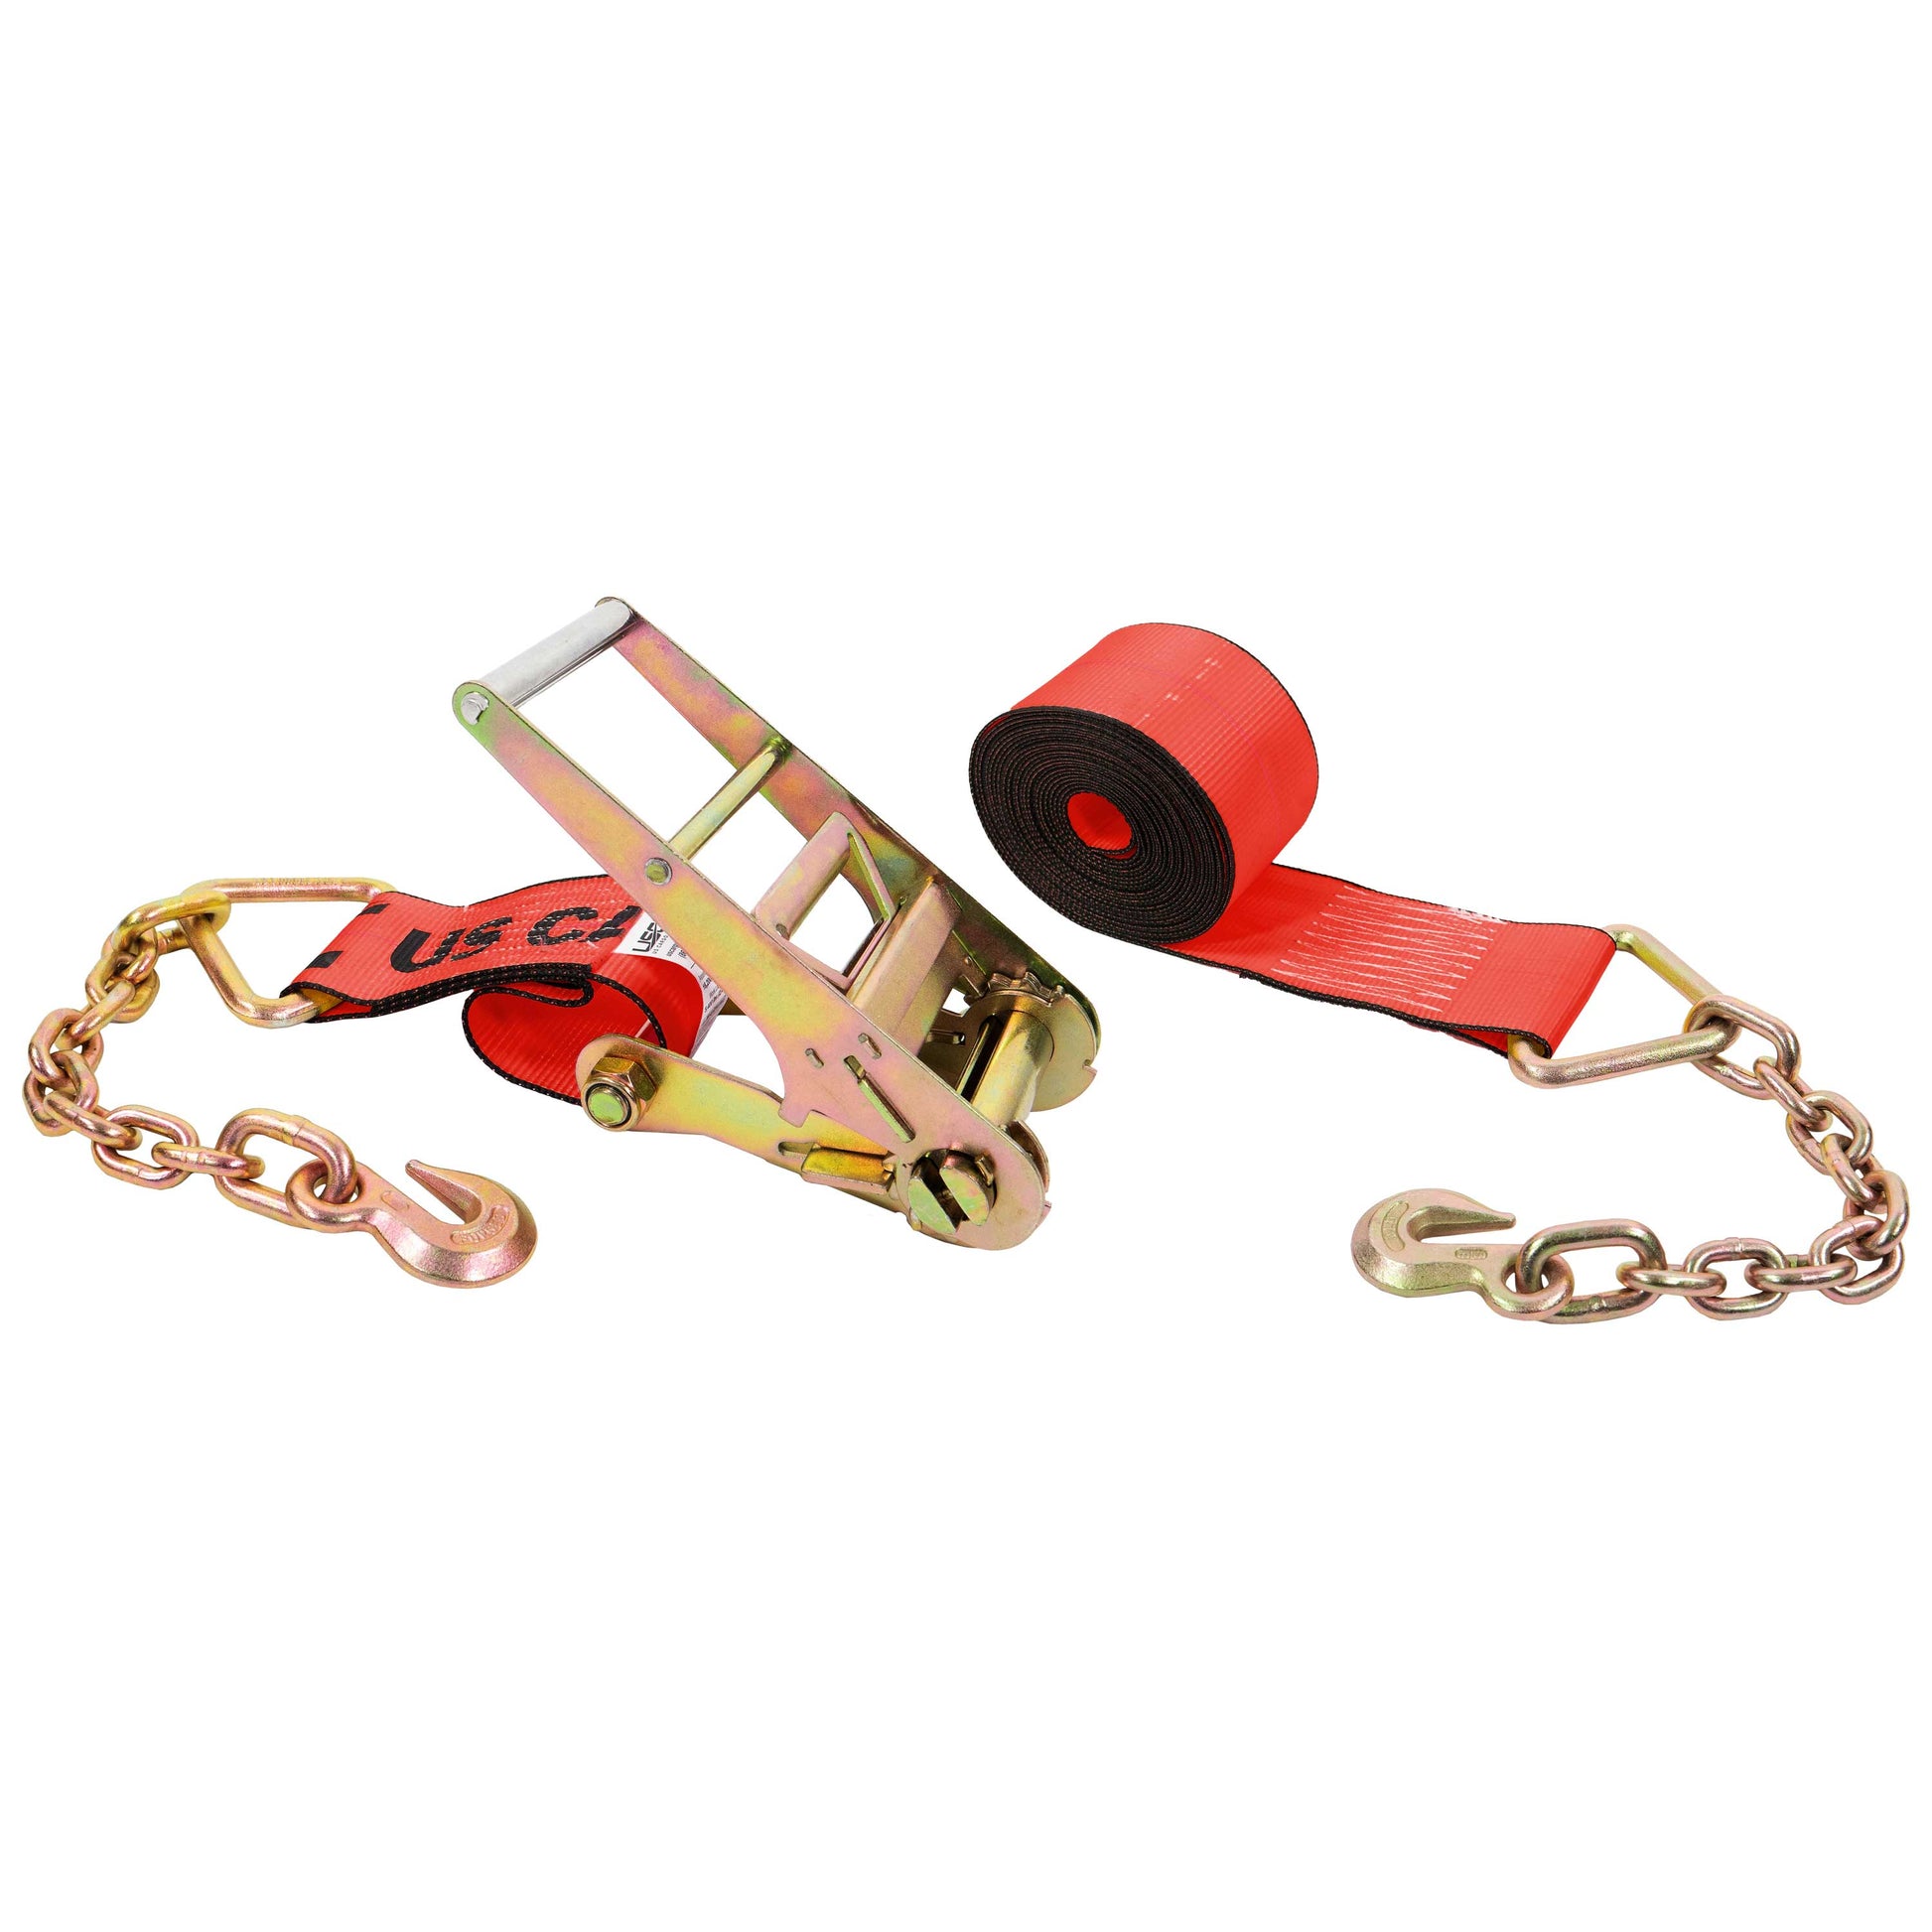 60' 4" heavy-duty red chain extension ratchet strap